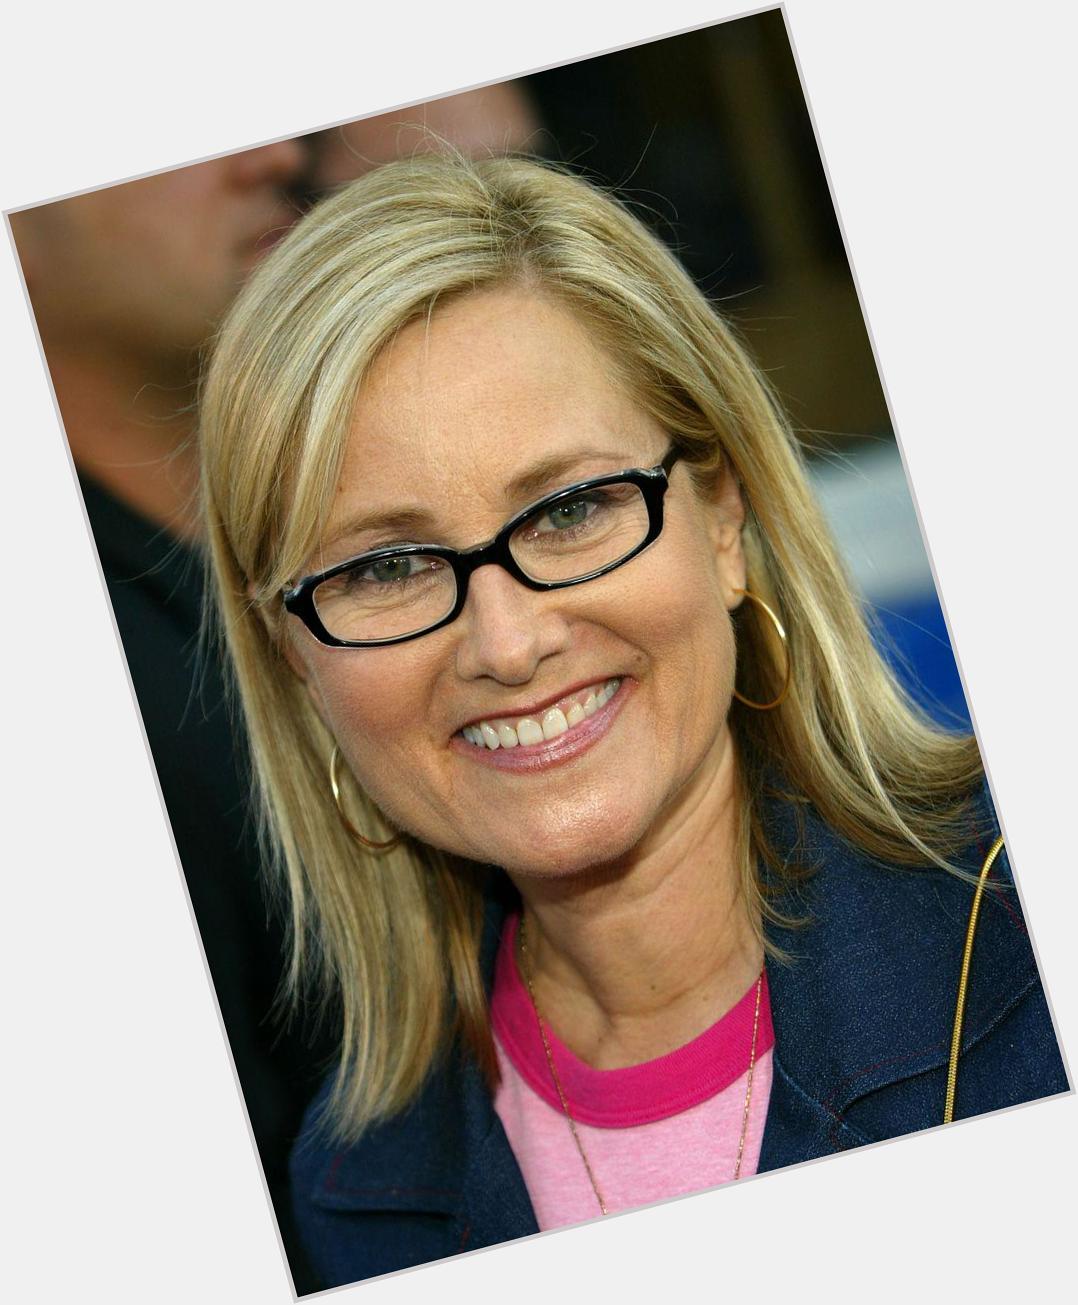 8/5:Happy 59th Birthday 2 actress Maureen McCormick! TV royalty 4 her role on Brady Bunch!  